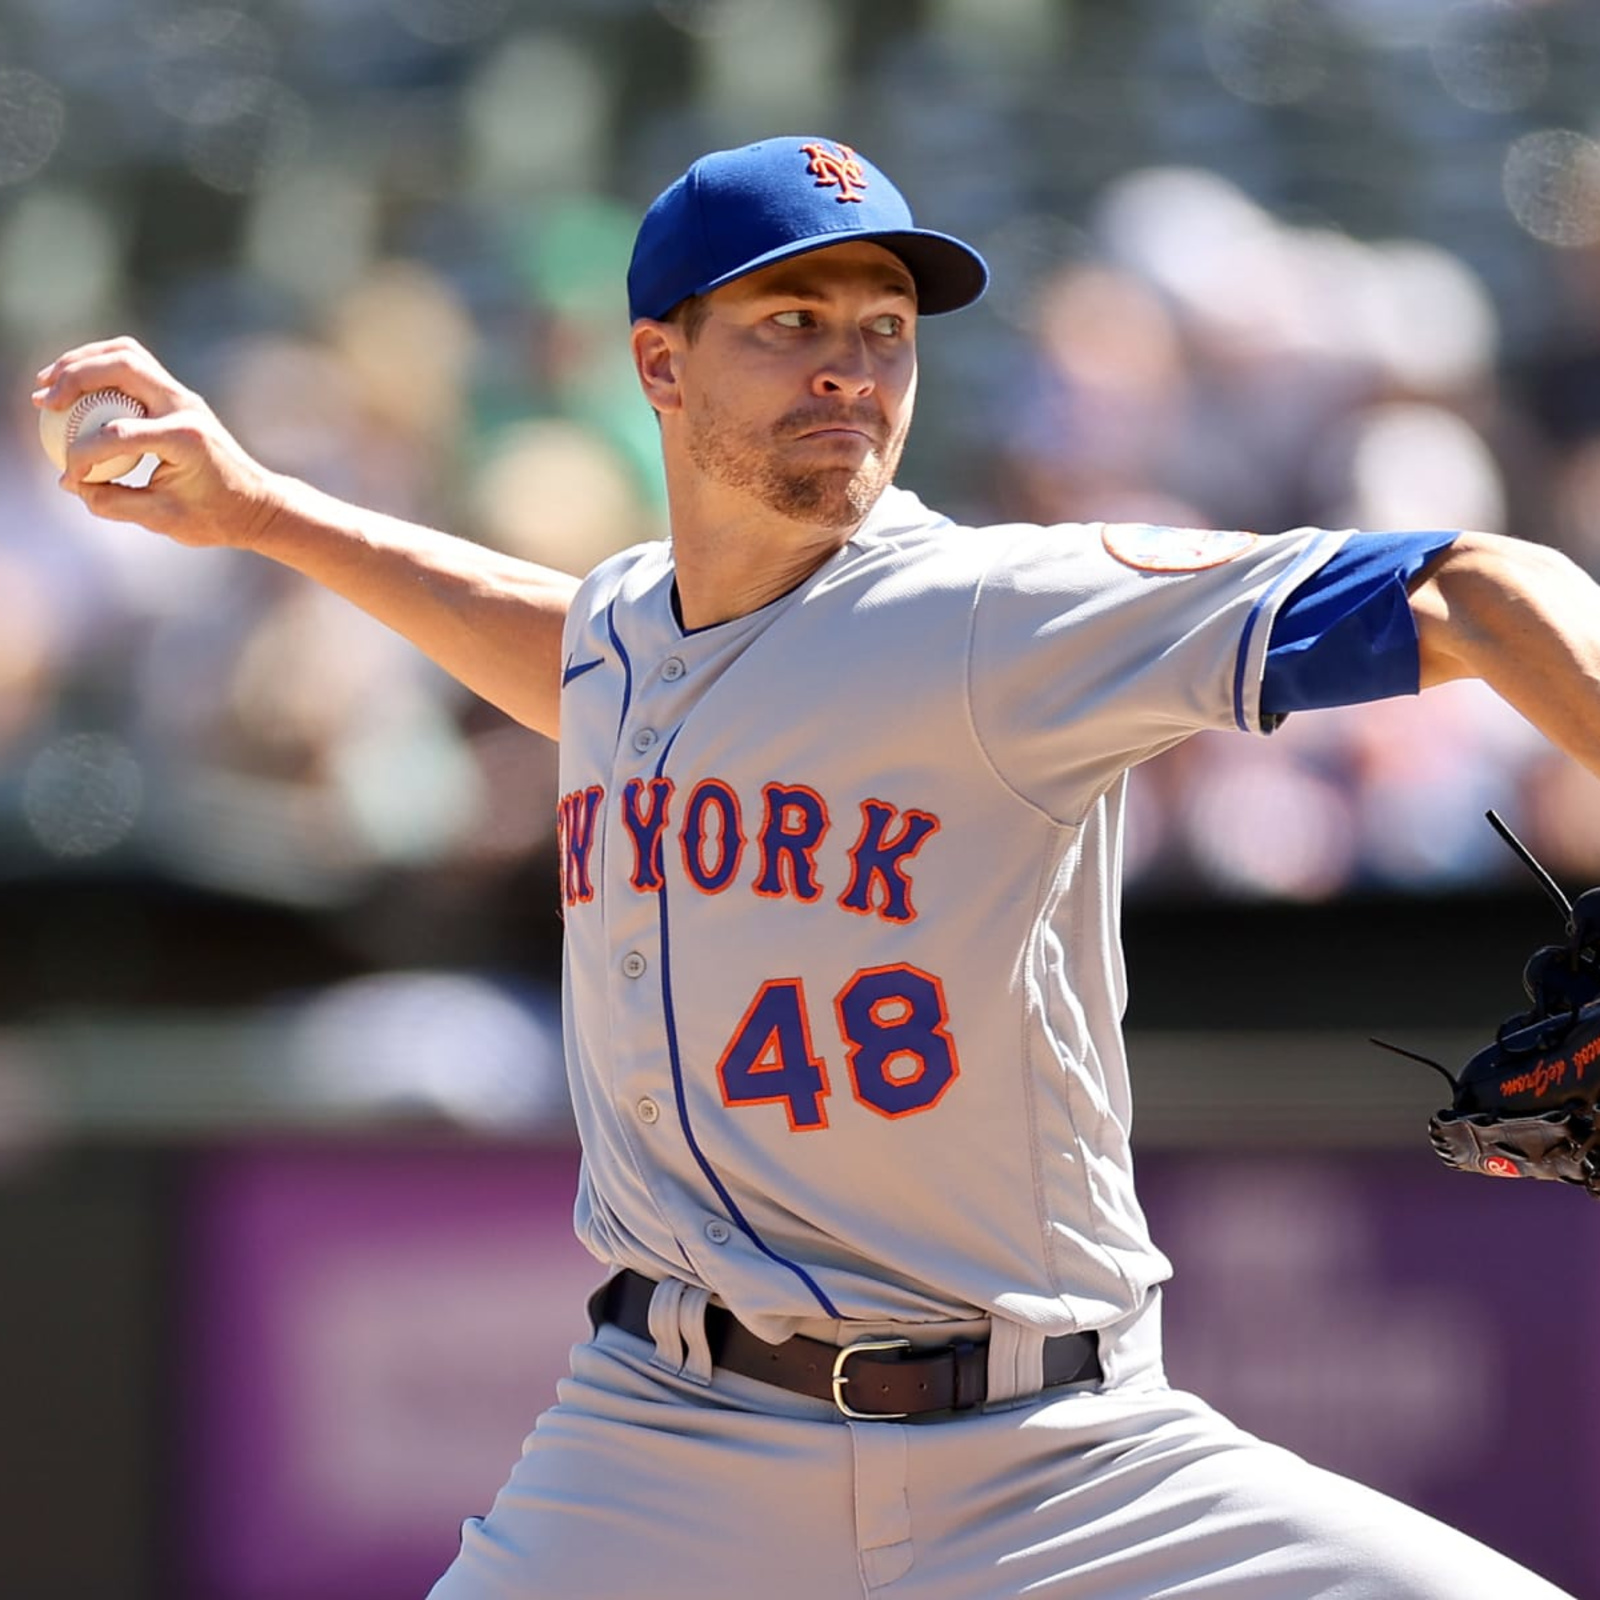 New York Mets Fall Hard to Rangers on Jacob deGrom's Shelling,10-8